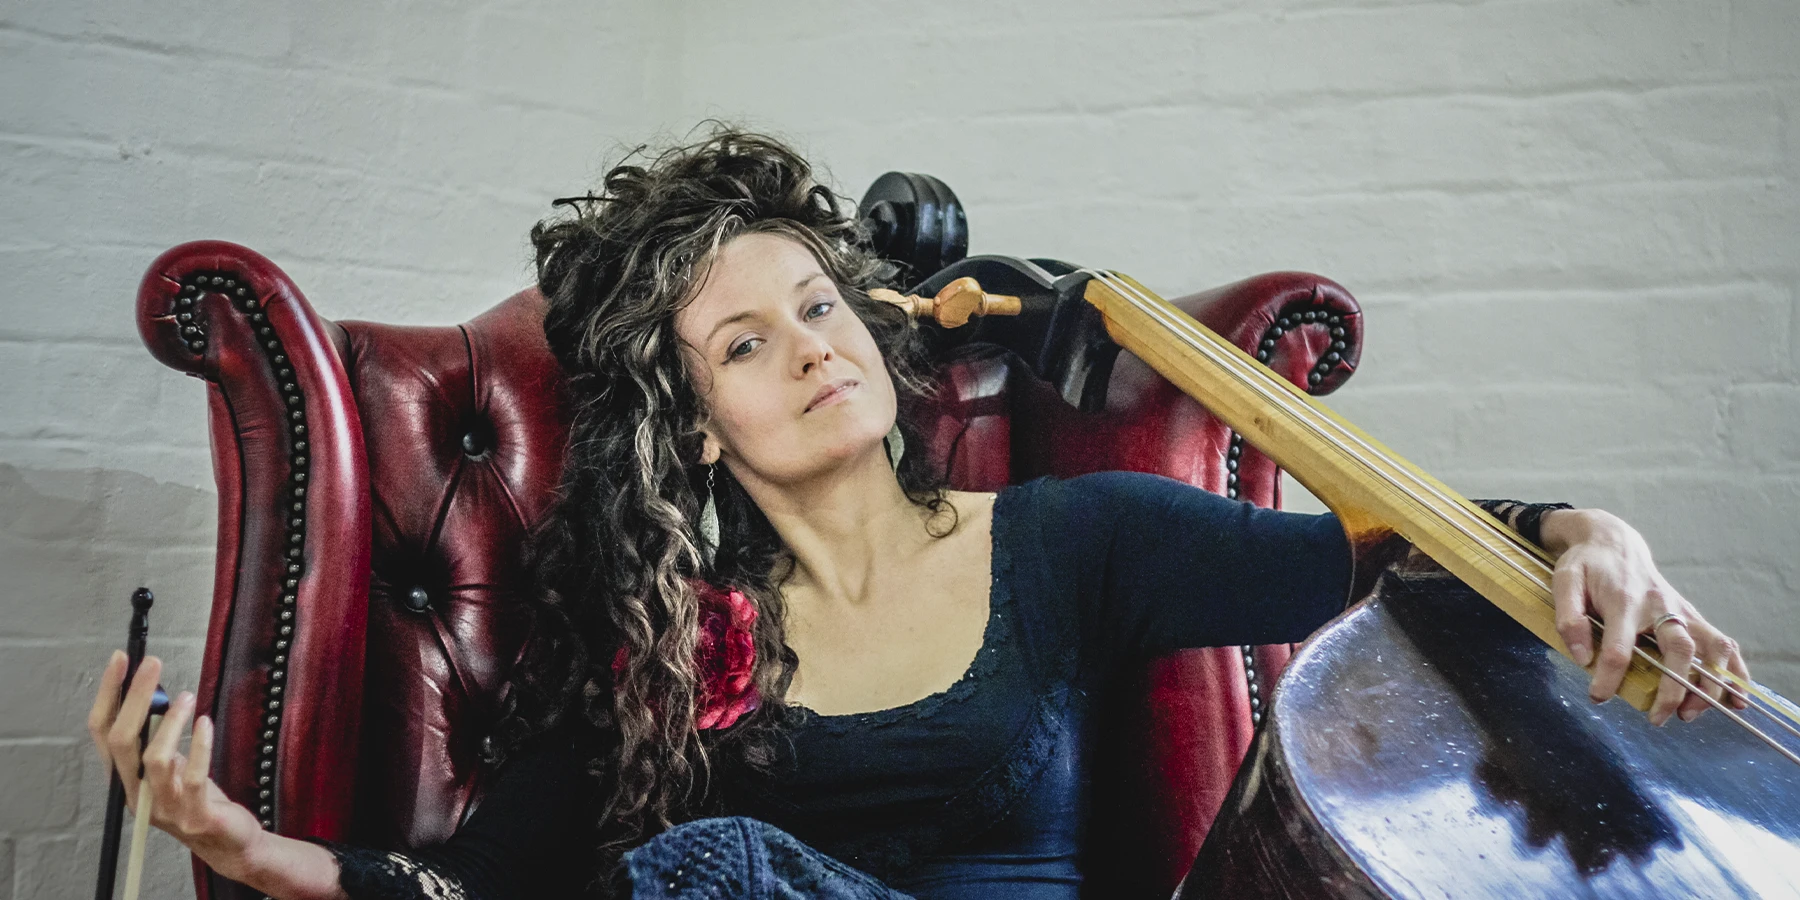 Rosie Moon performs 12 Dragonetti Waltzes on a rare 3-string Gagliano double bass at JAM on the Marsh.